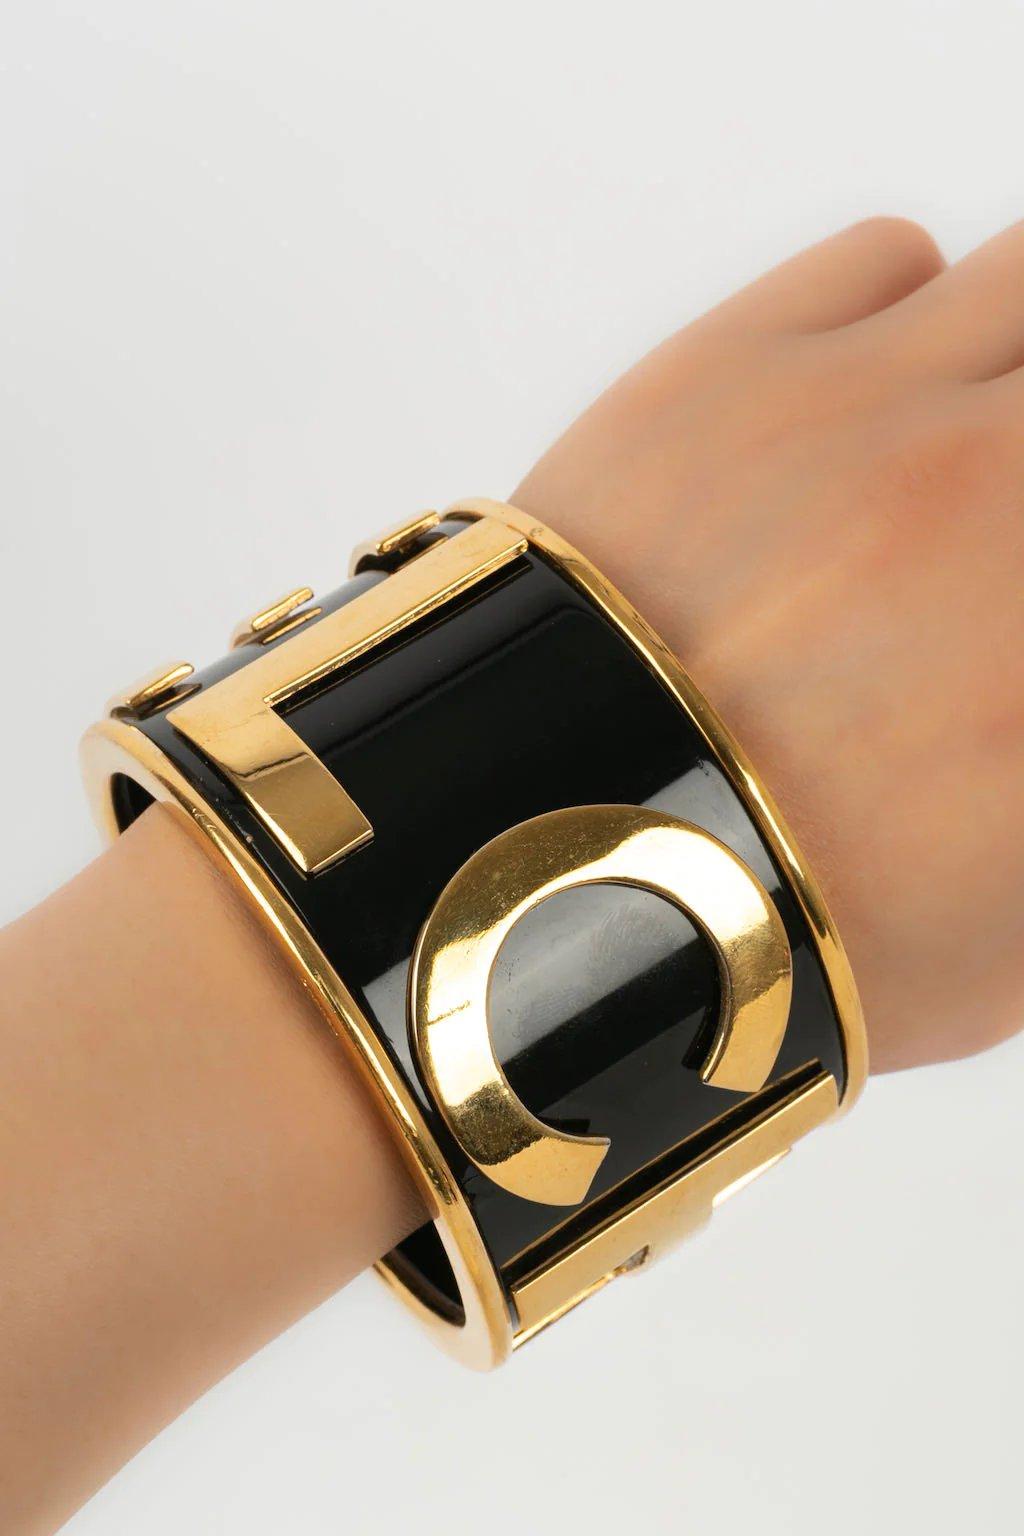 Chanel Cuff Bracelt in Black and Gold, Spring 1990/91 For Sale 1